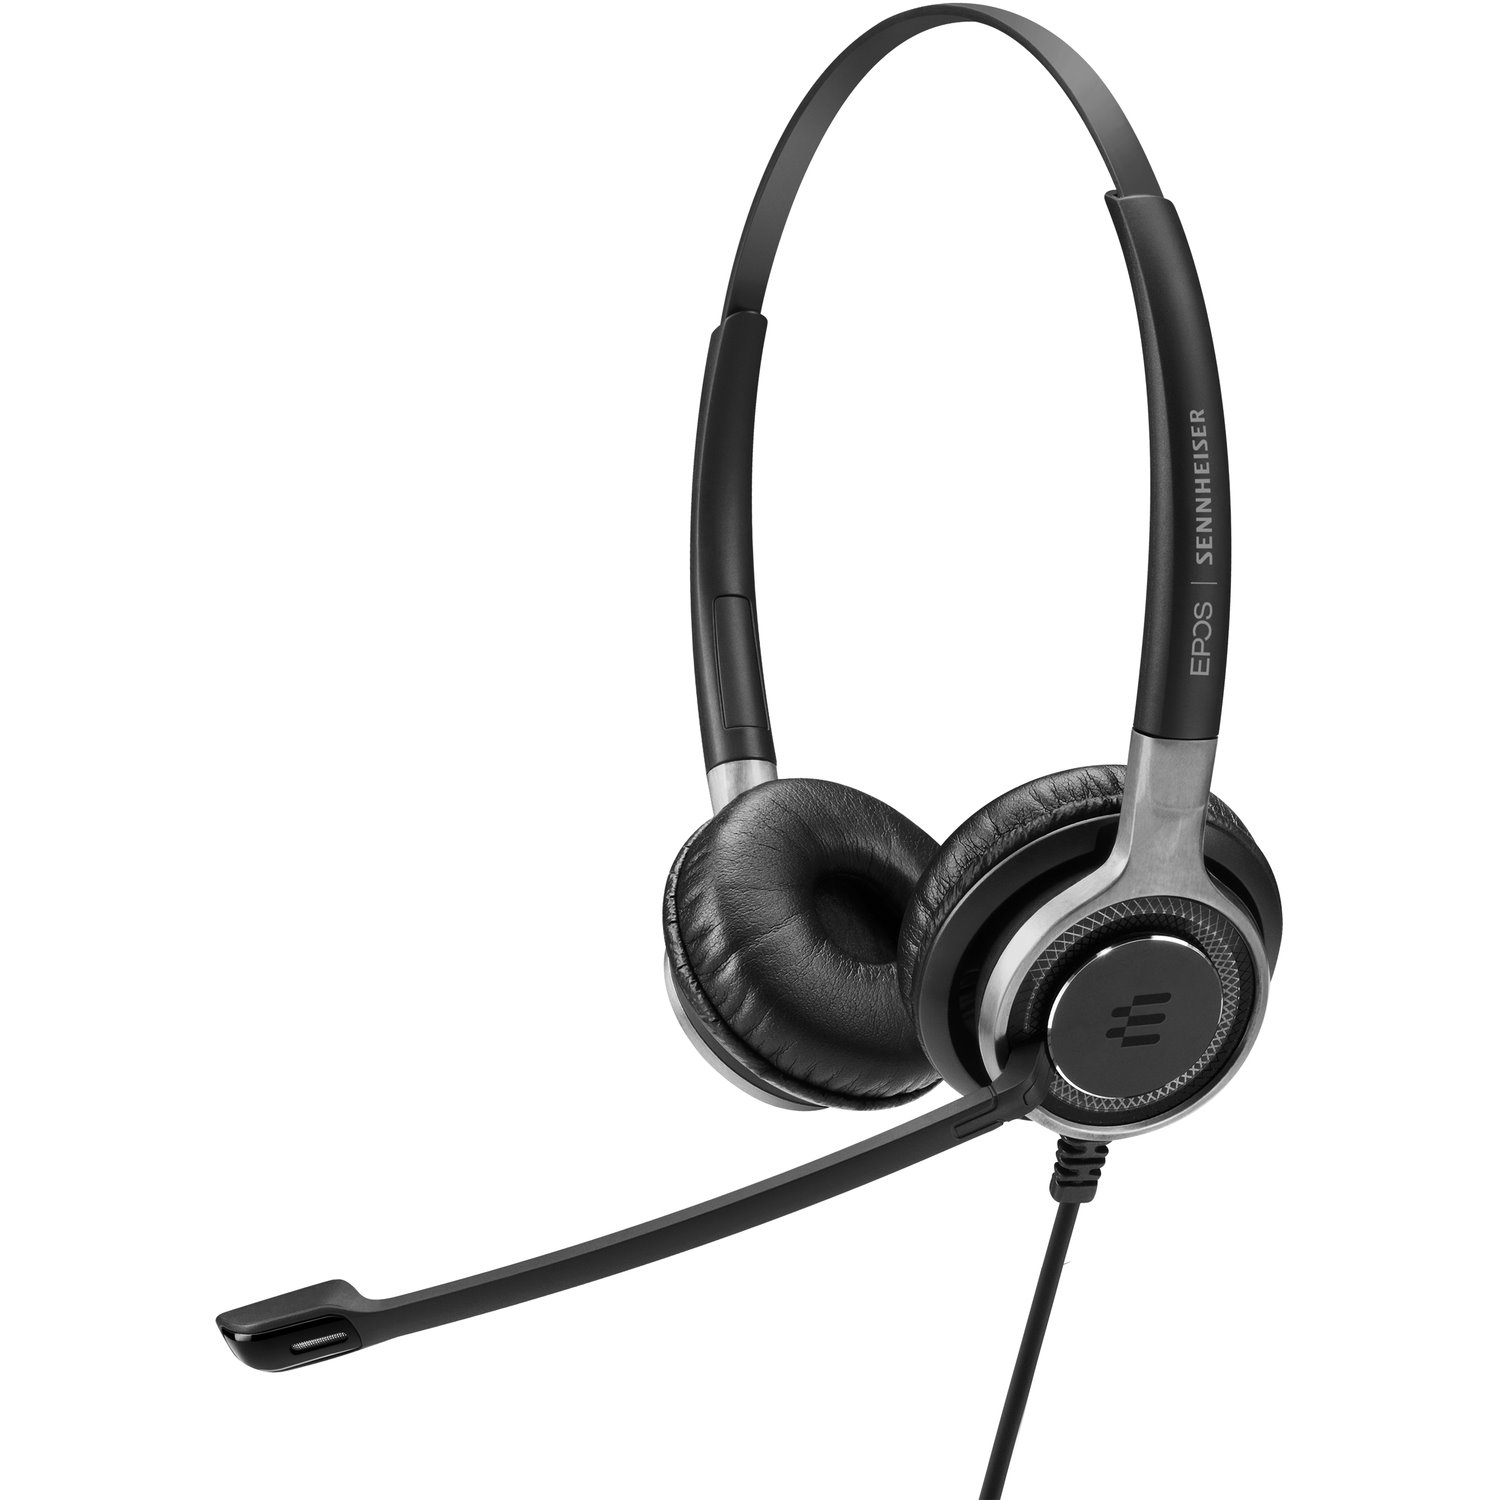 EPOS IMPACT SC 660 TC Wired On-ear Stereo Headset - Silver, Black